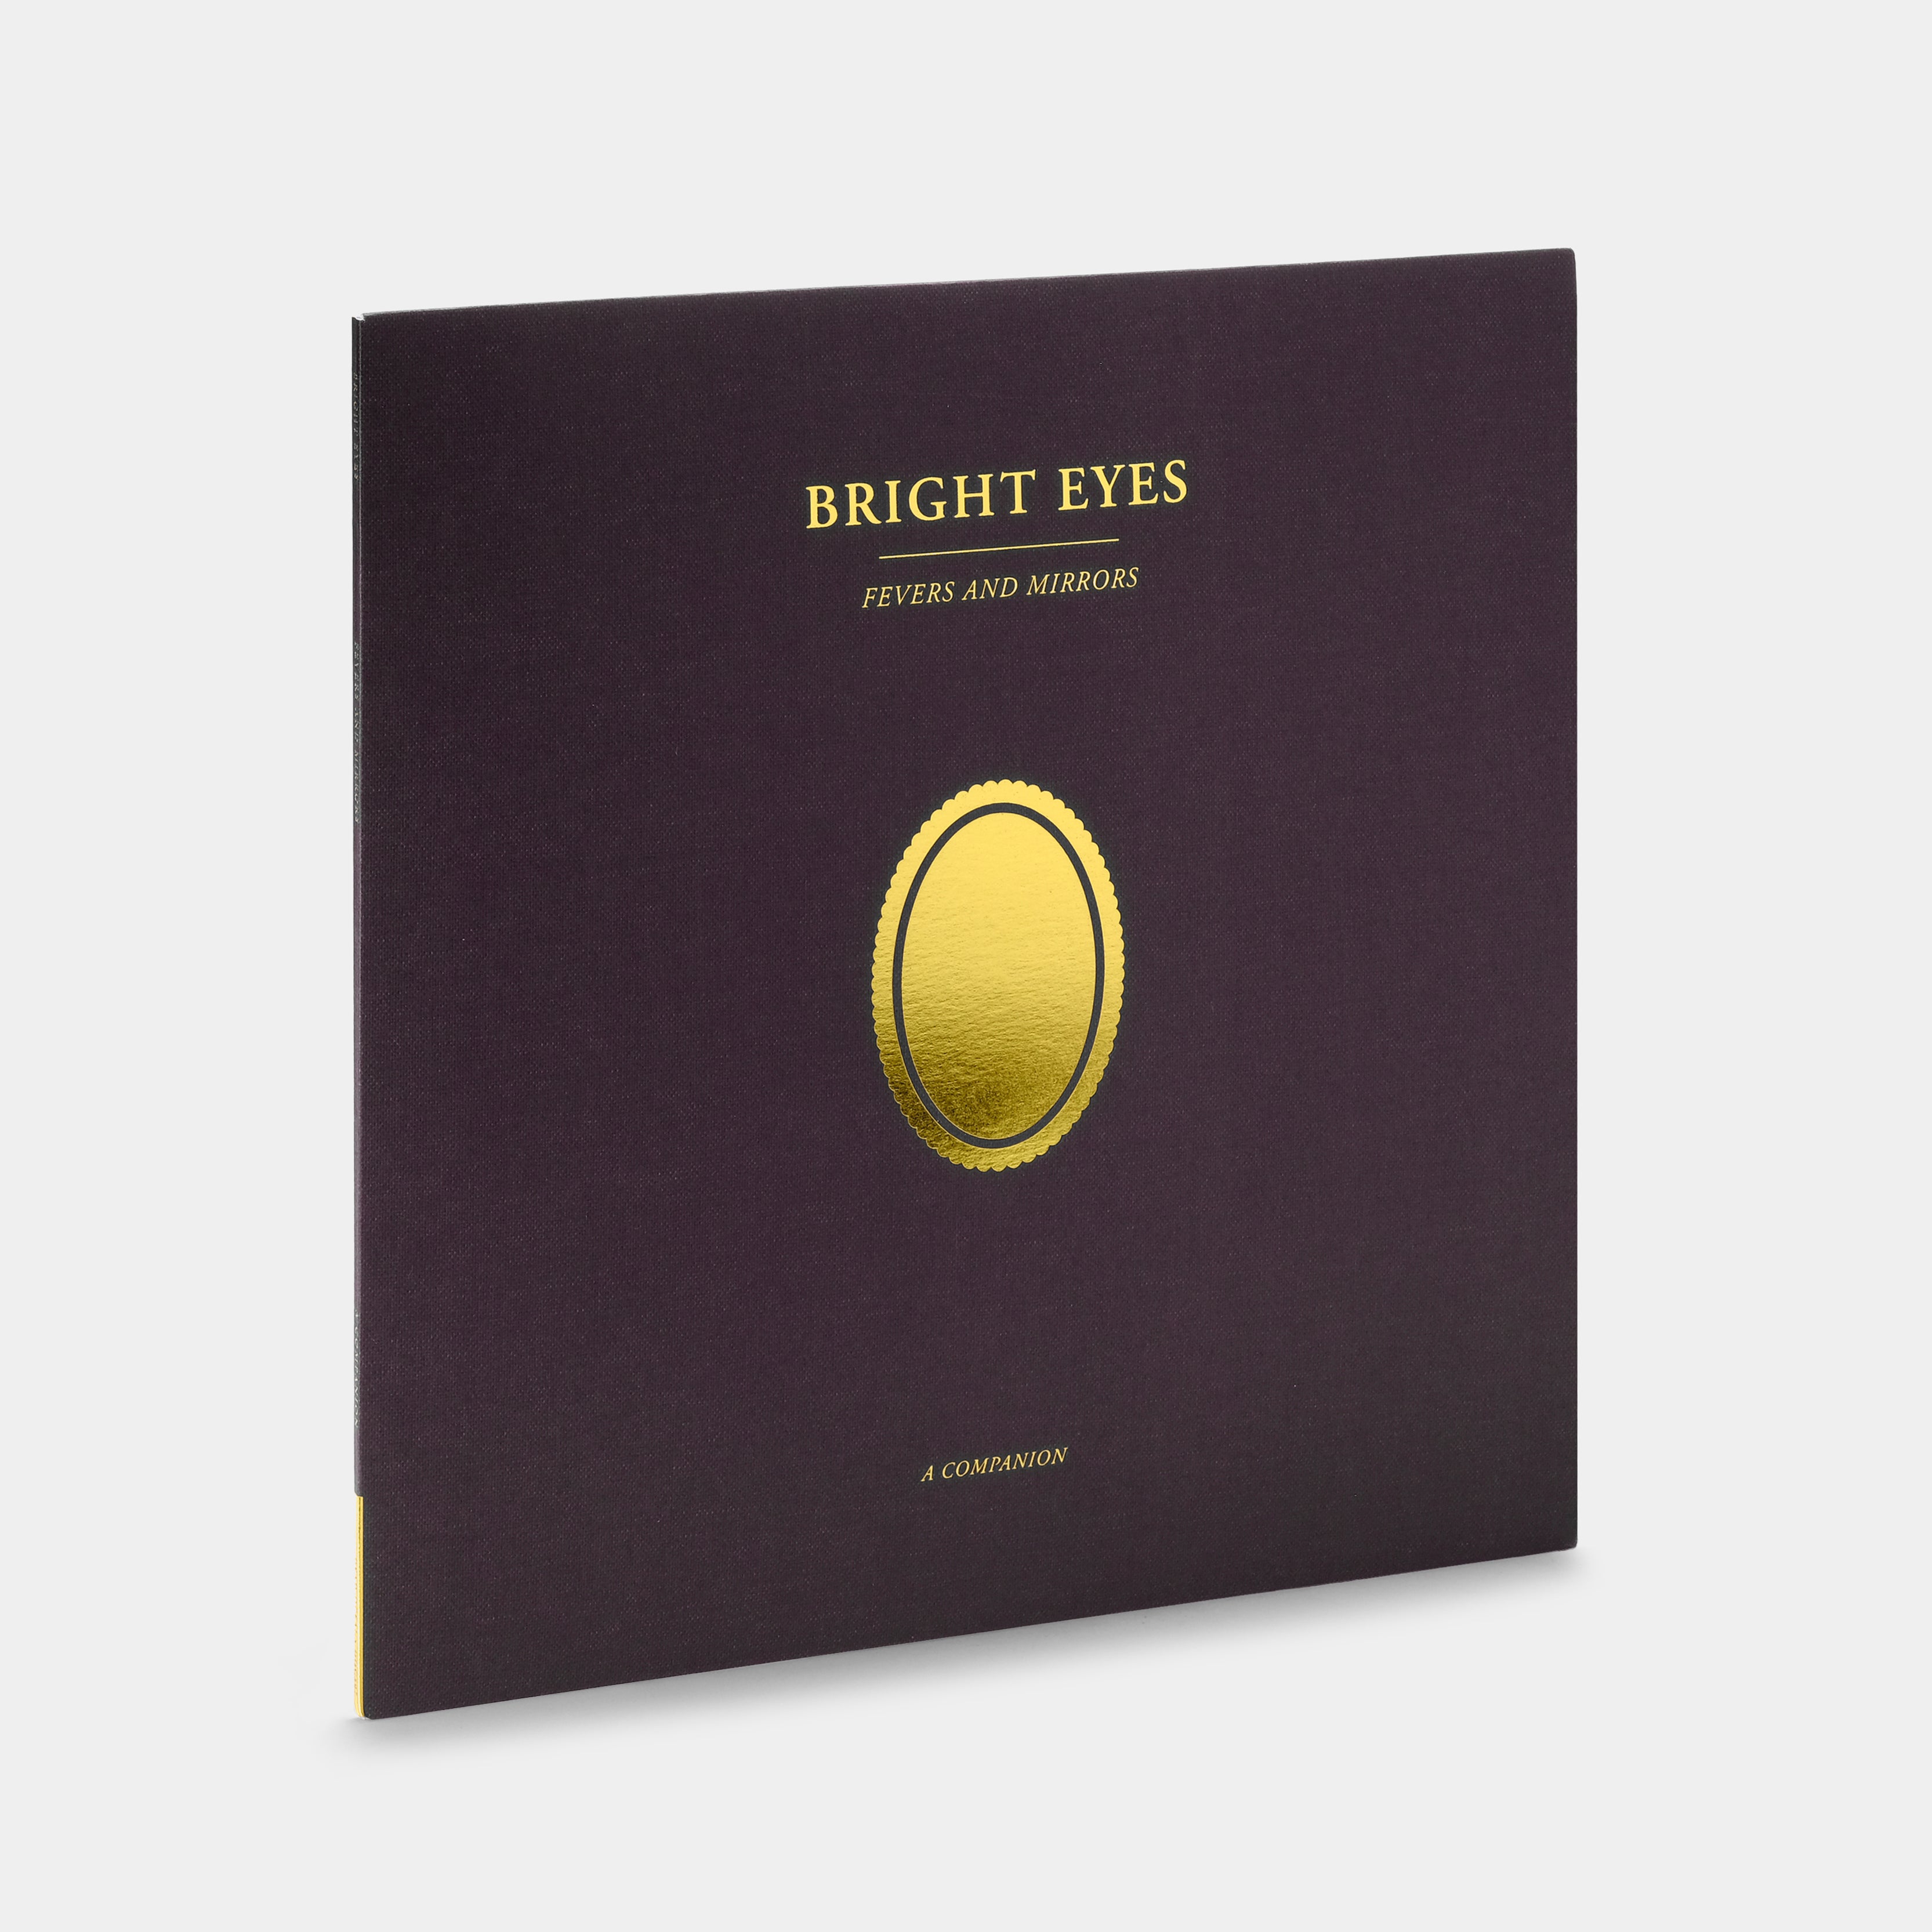 Bright Eyes - Fevers and Mirrors (A Companion) EP Opaque Gold Vinyl Record